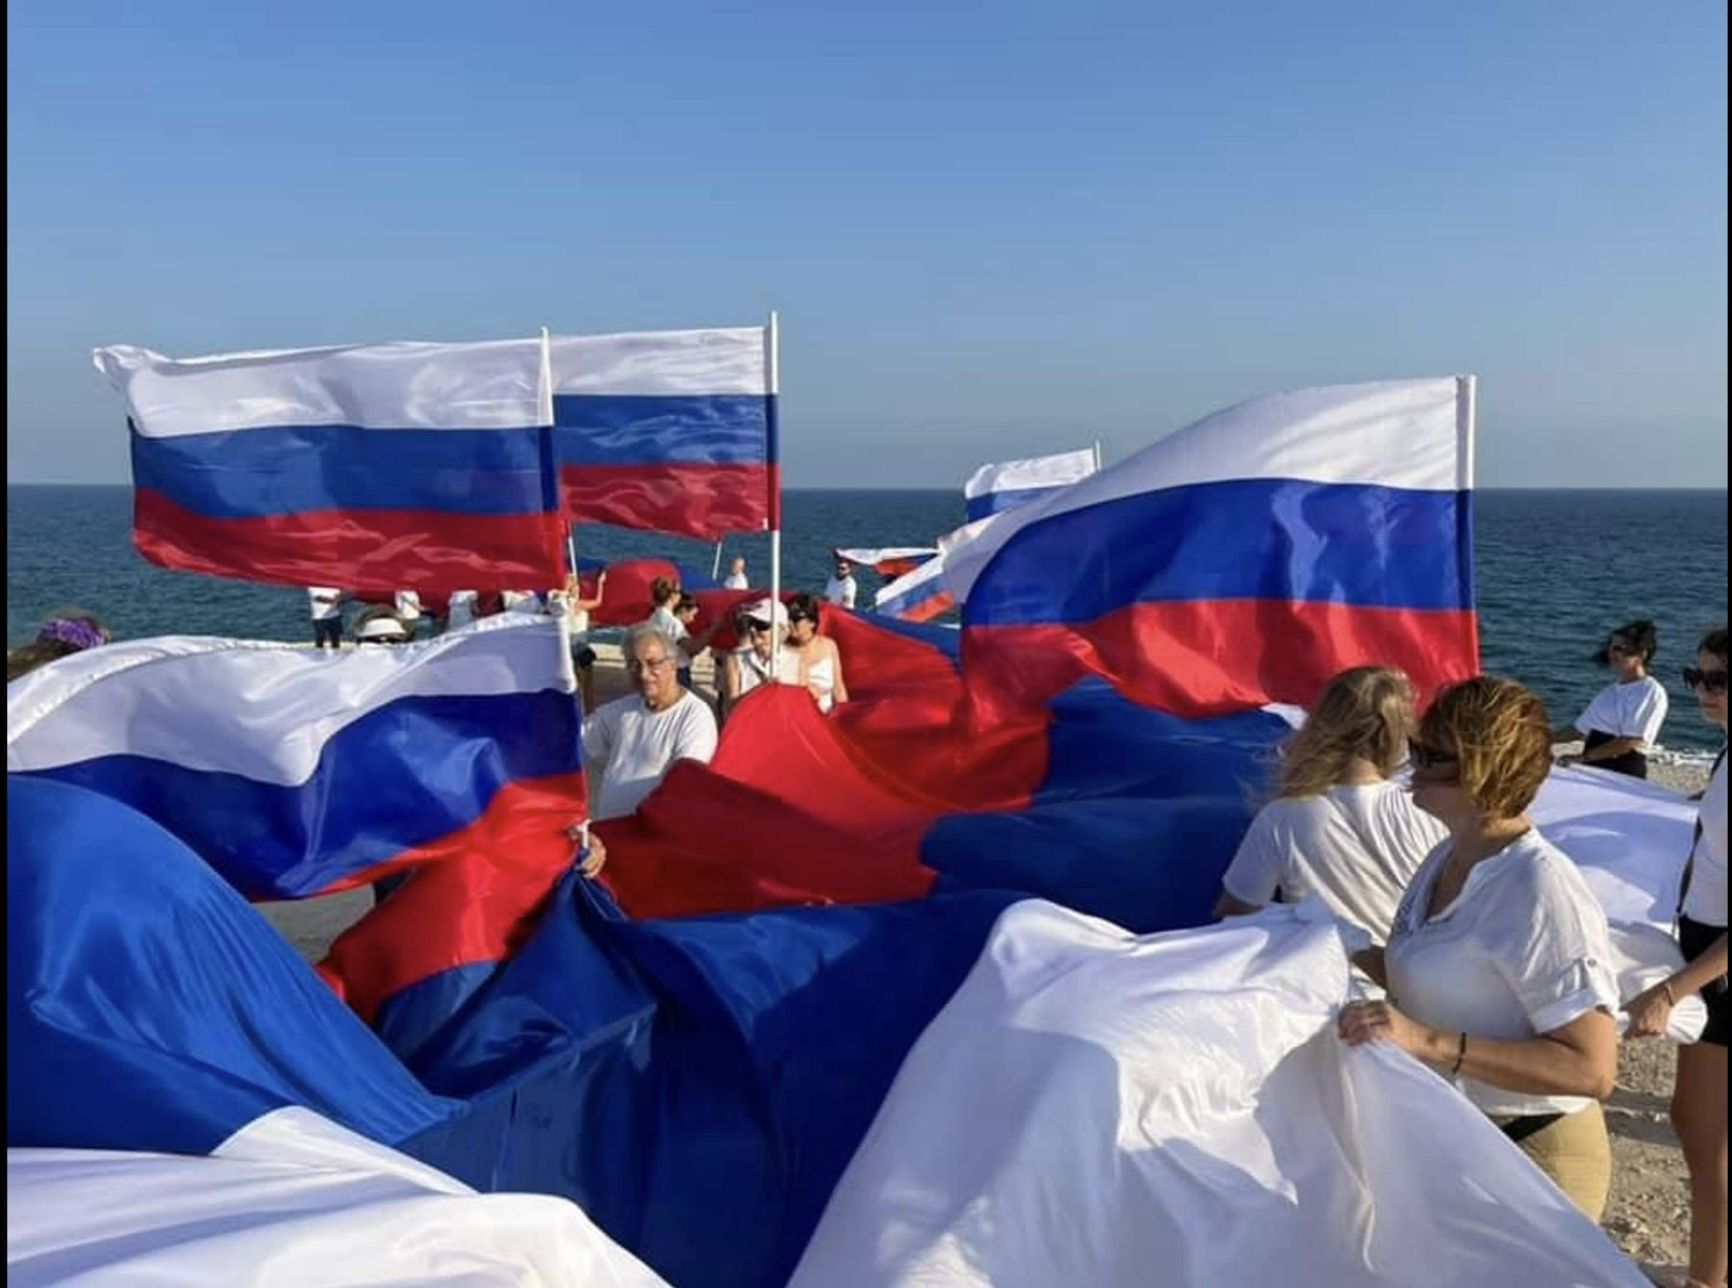 Pro-Russian rally in Limassol